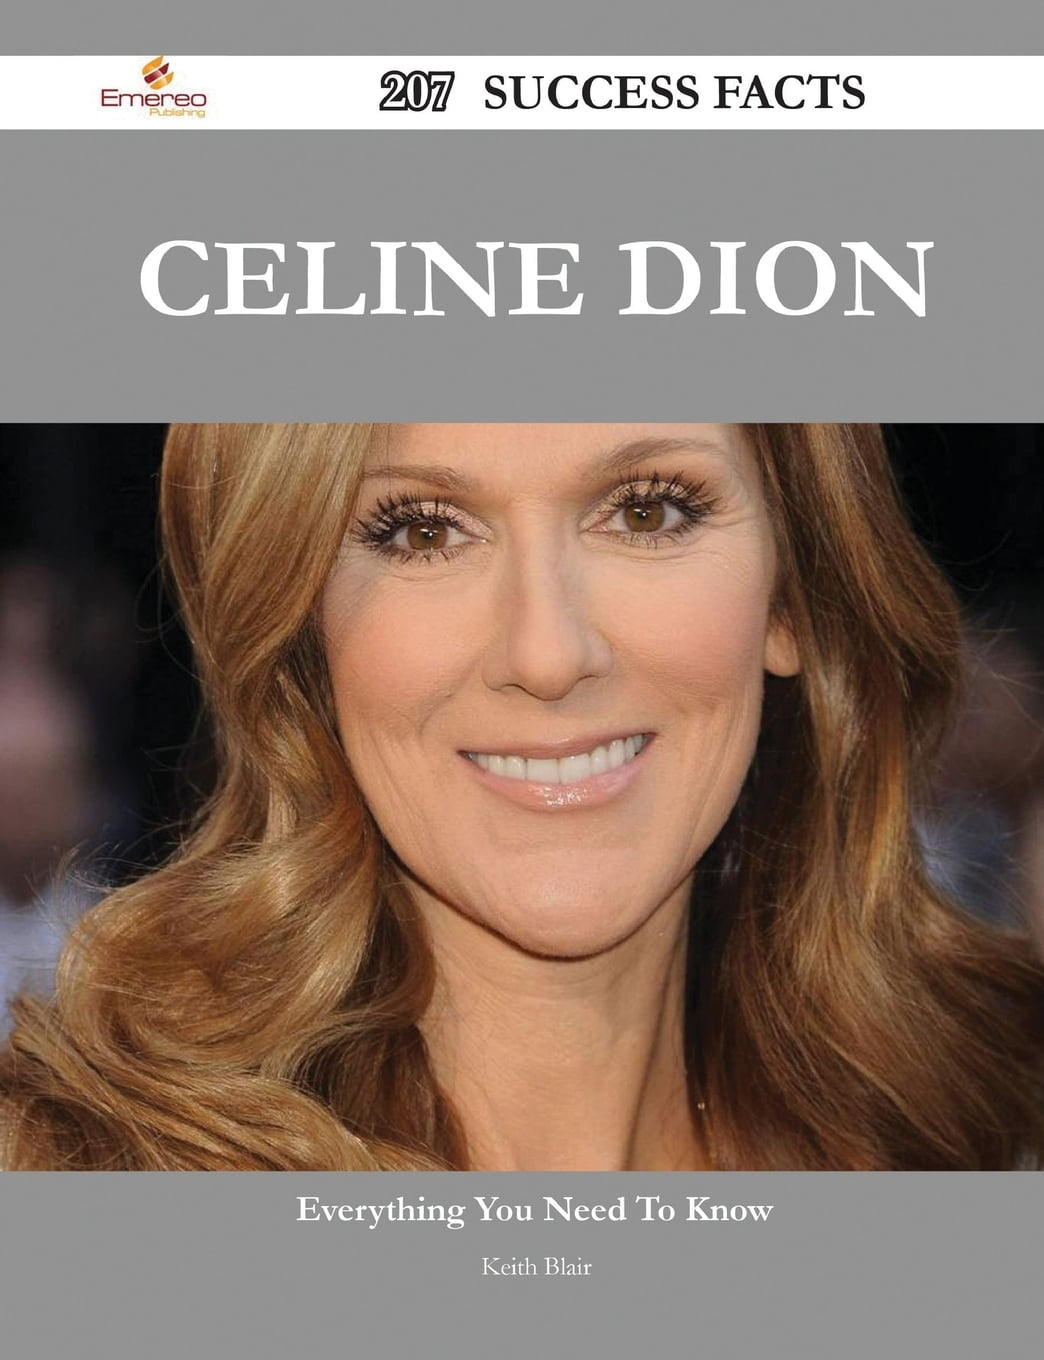 Celine Dion 207 Success Facts - Everything You Need to Know about ...